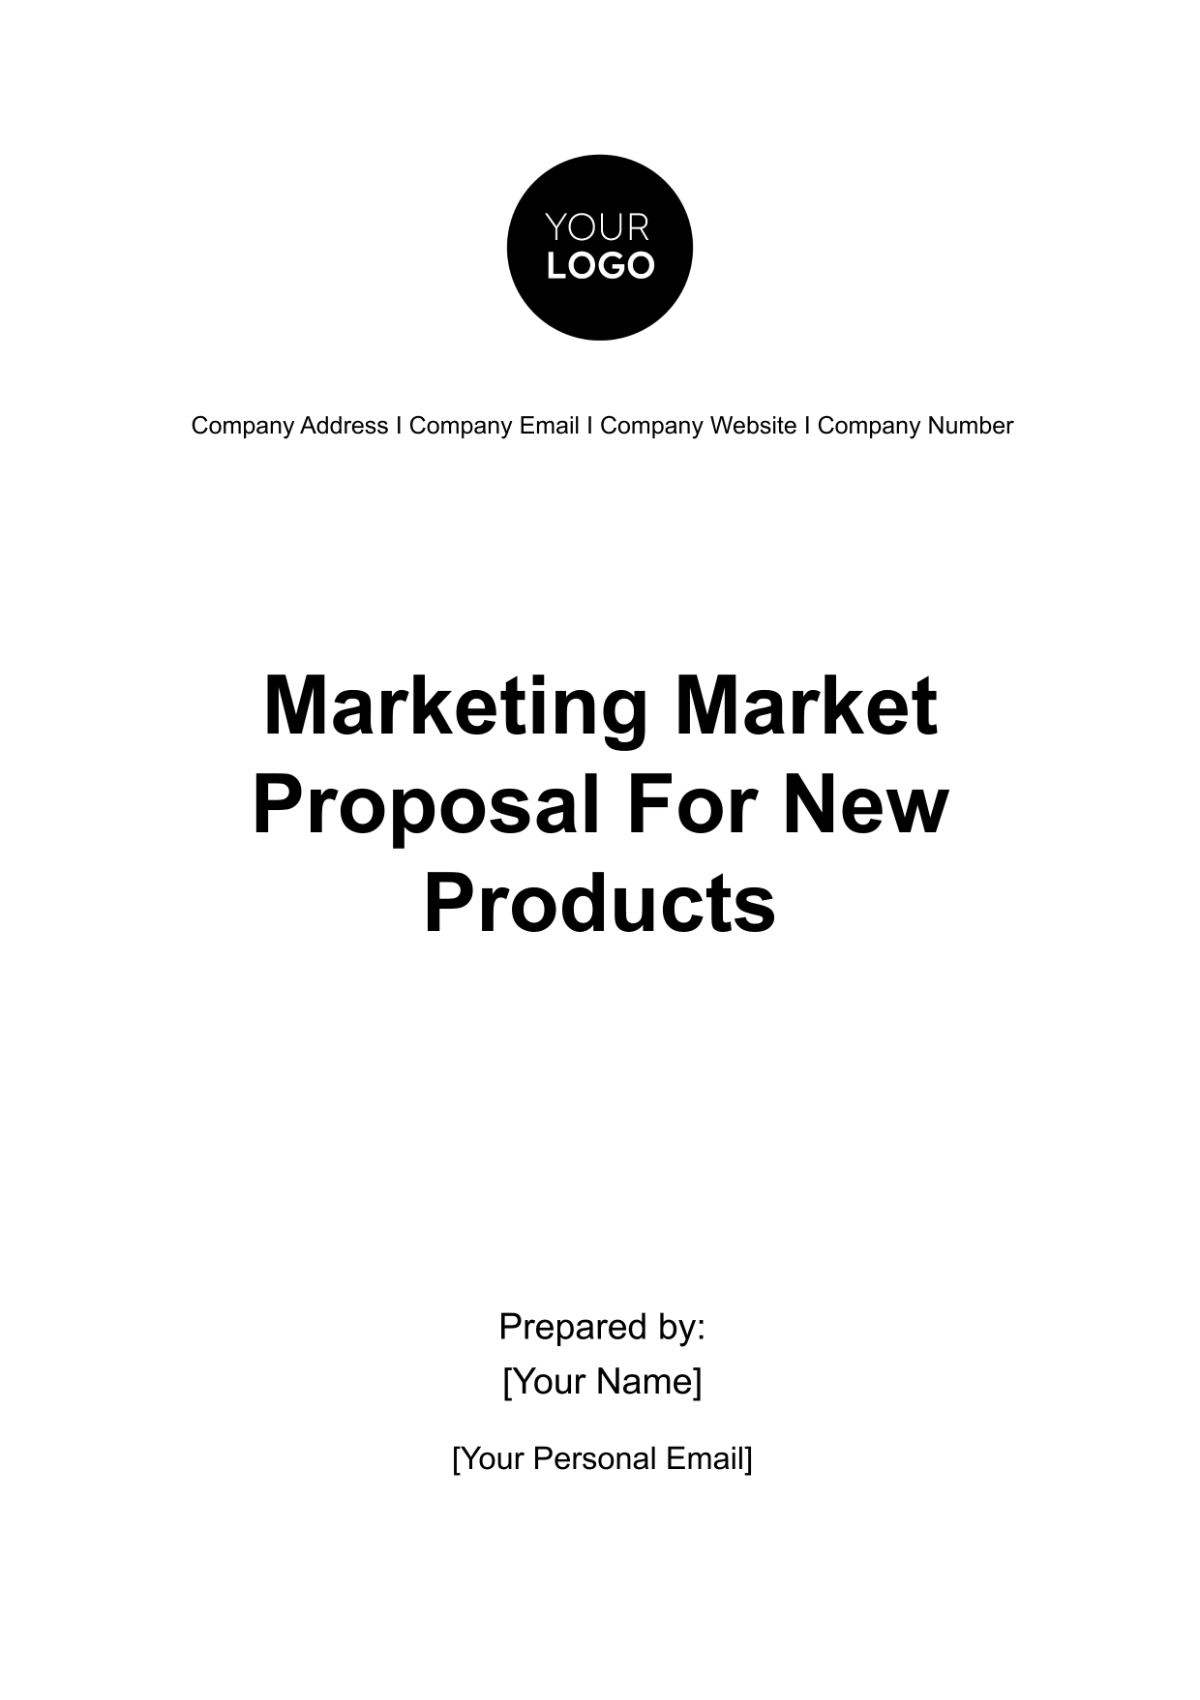 Marketing Market Proposal for New Products Template